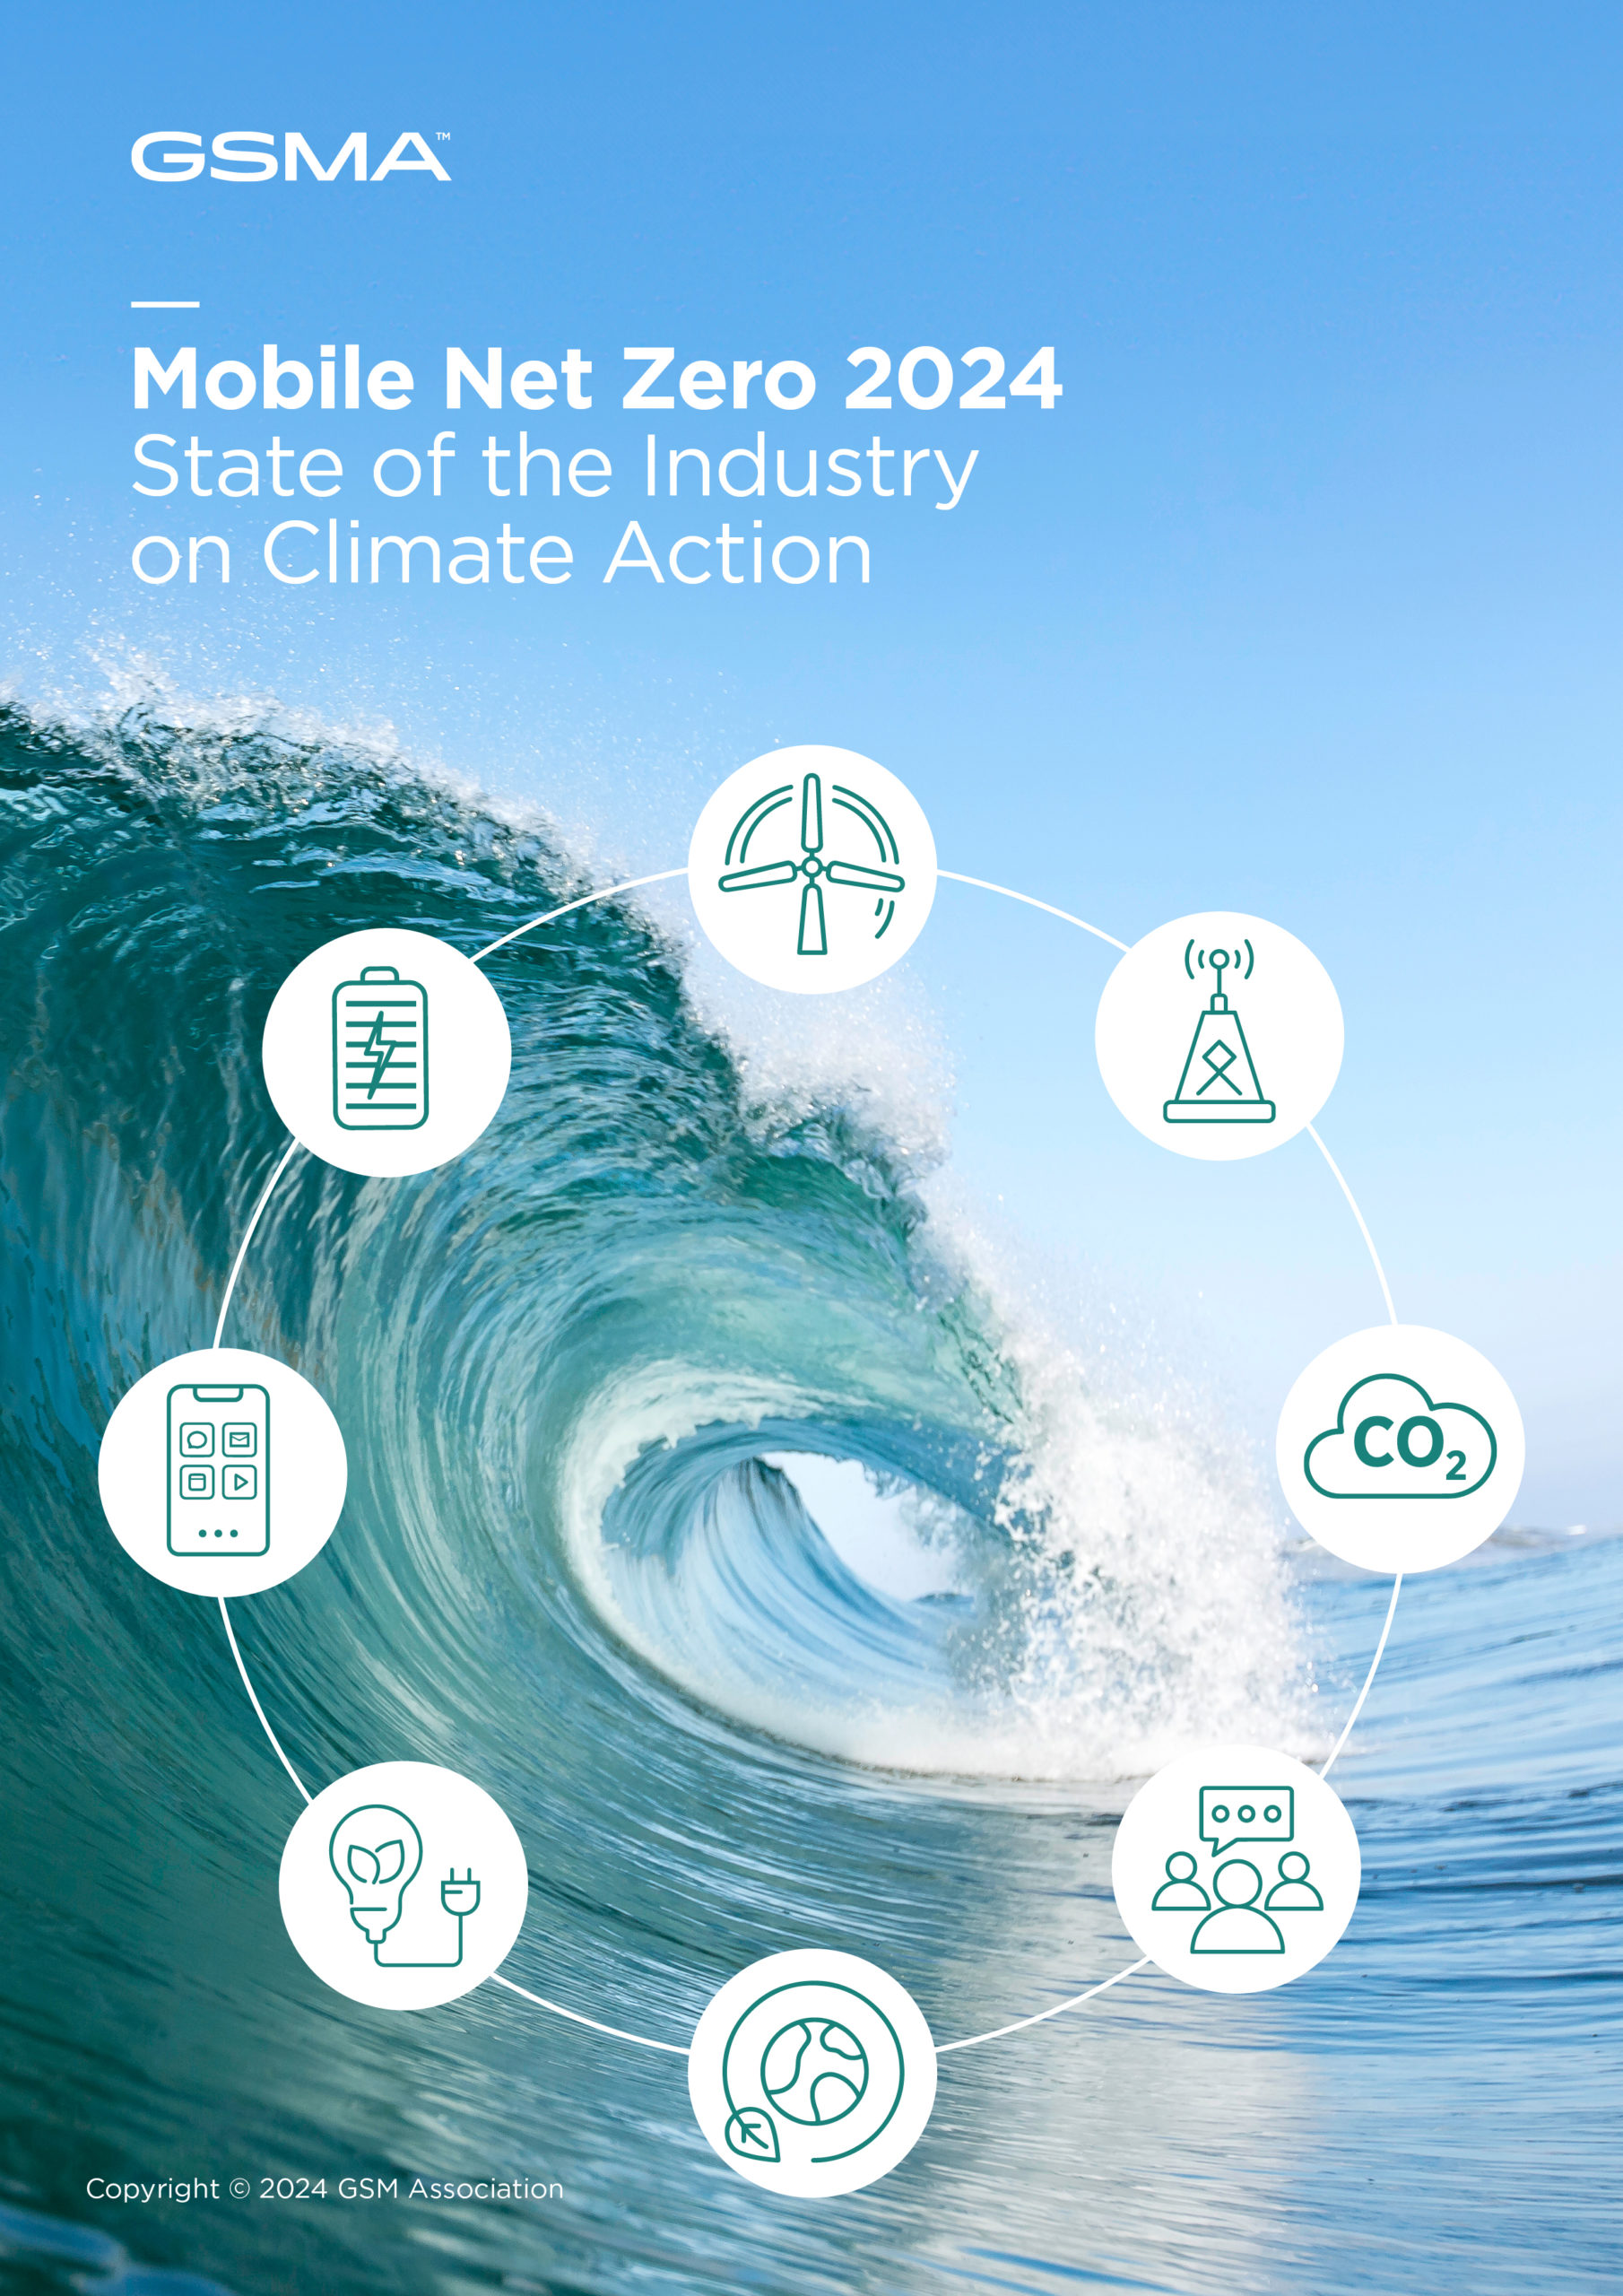 Mobile Net Zero 2024: State of the Industry on Climate Action